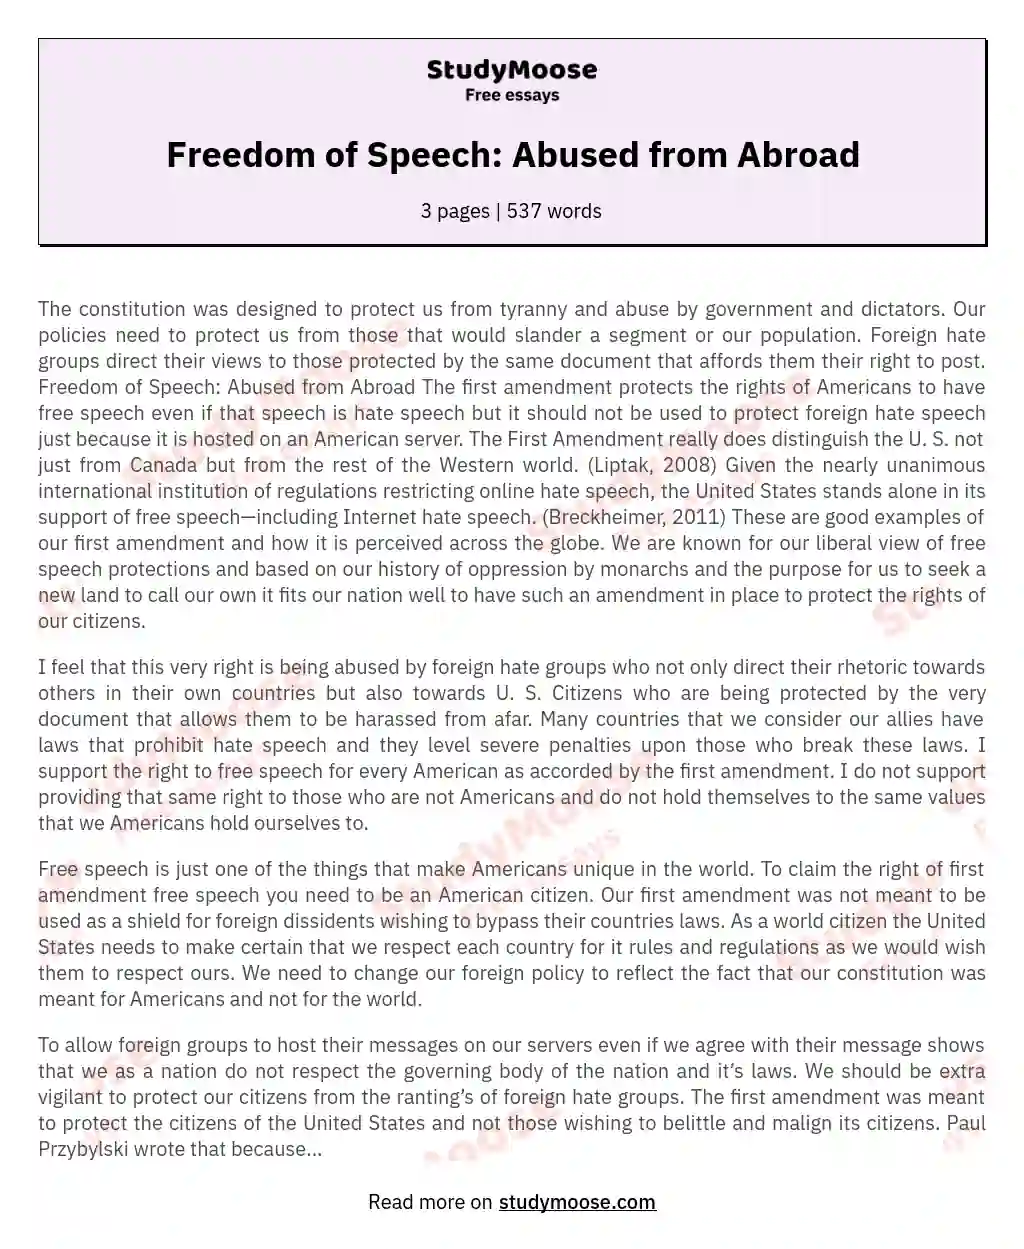 Freedom of Speech: Abused from Abroad essay